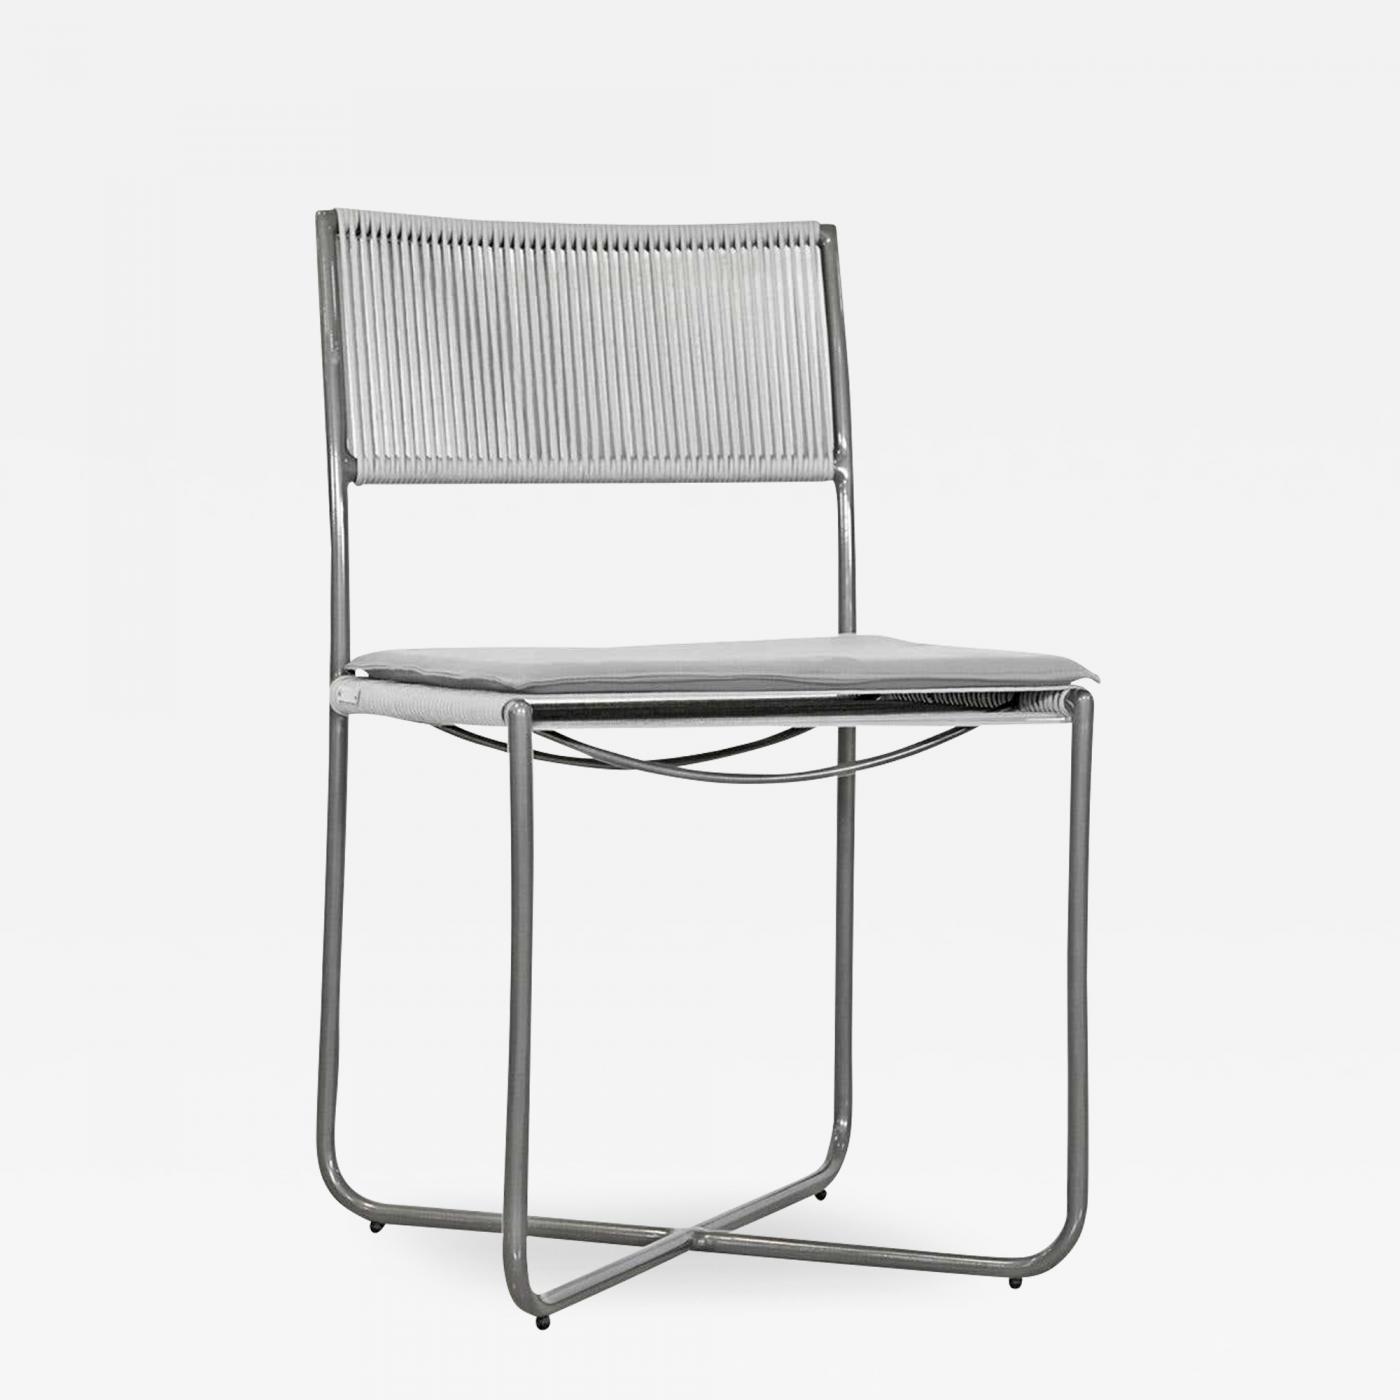 SIMONINI© - Minimalist Modern Outdoor Chair, Metal Structure with